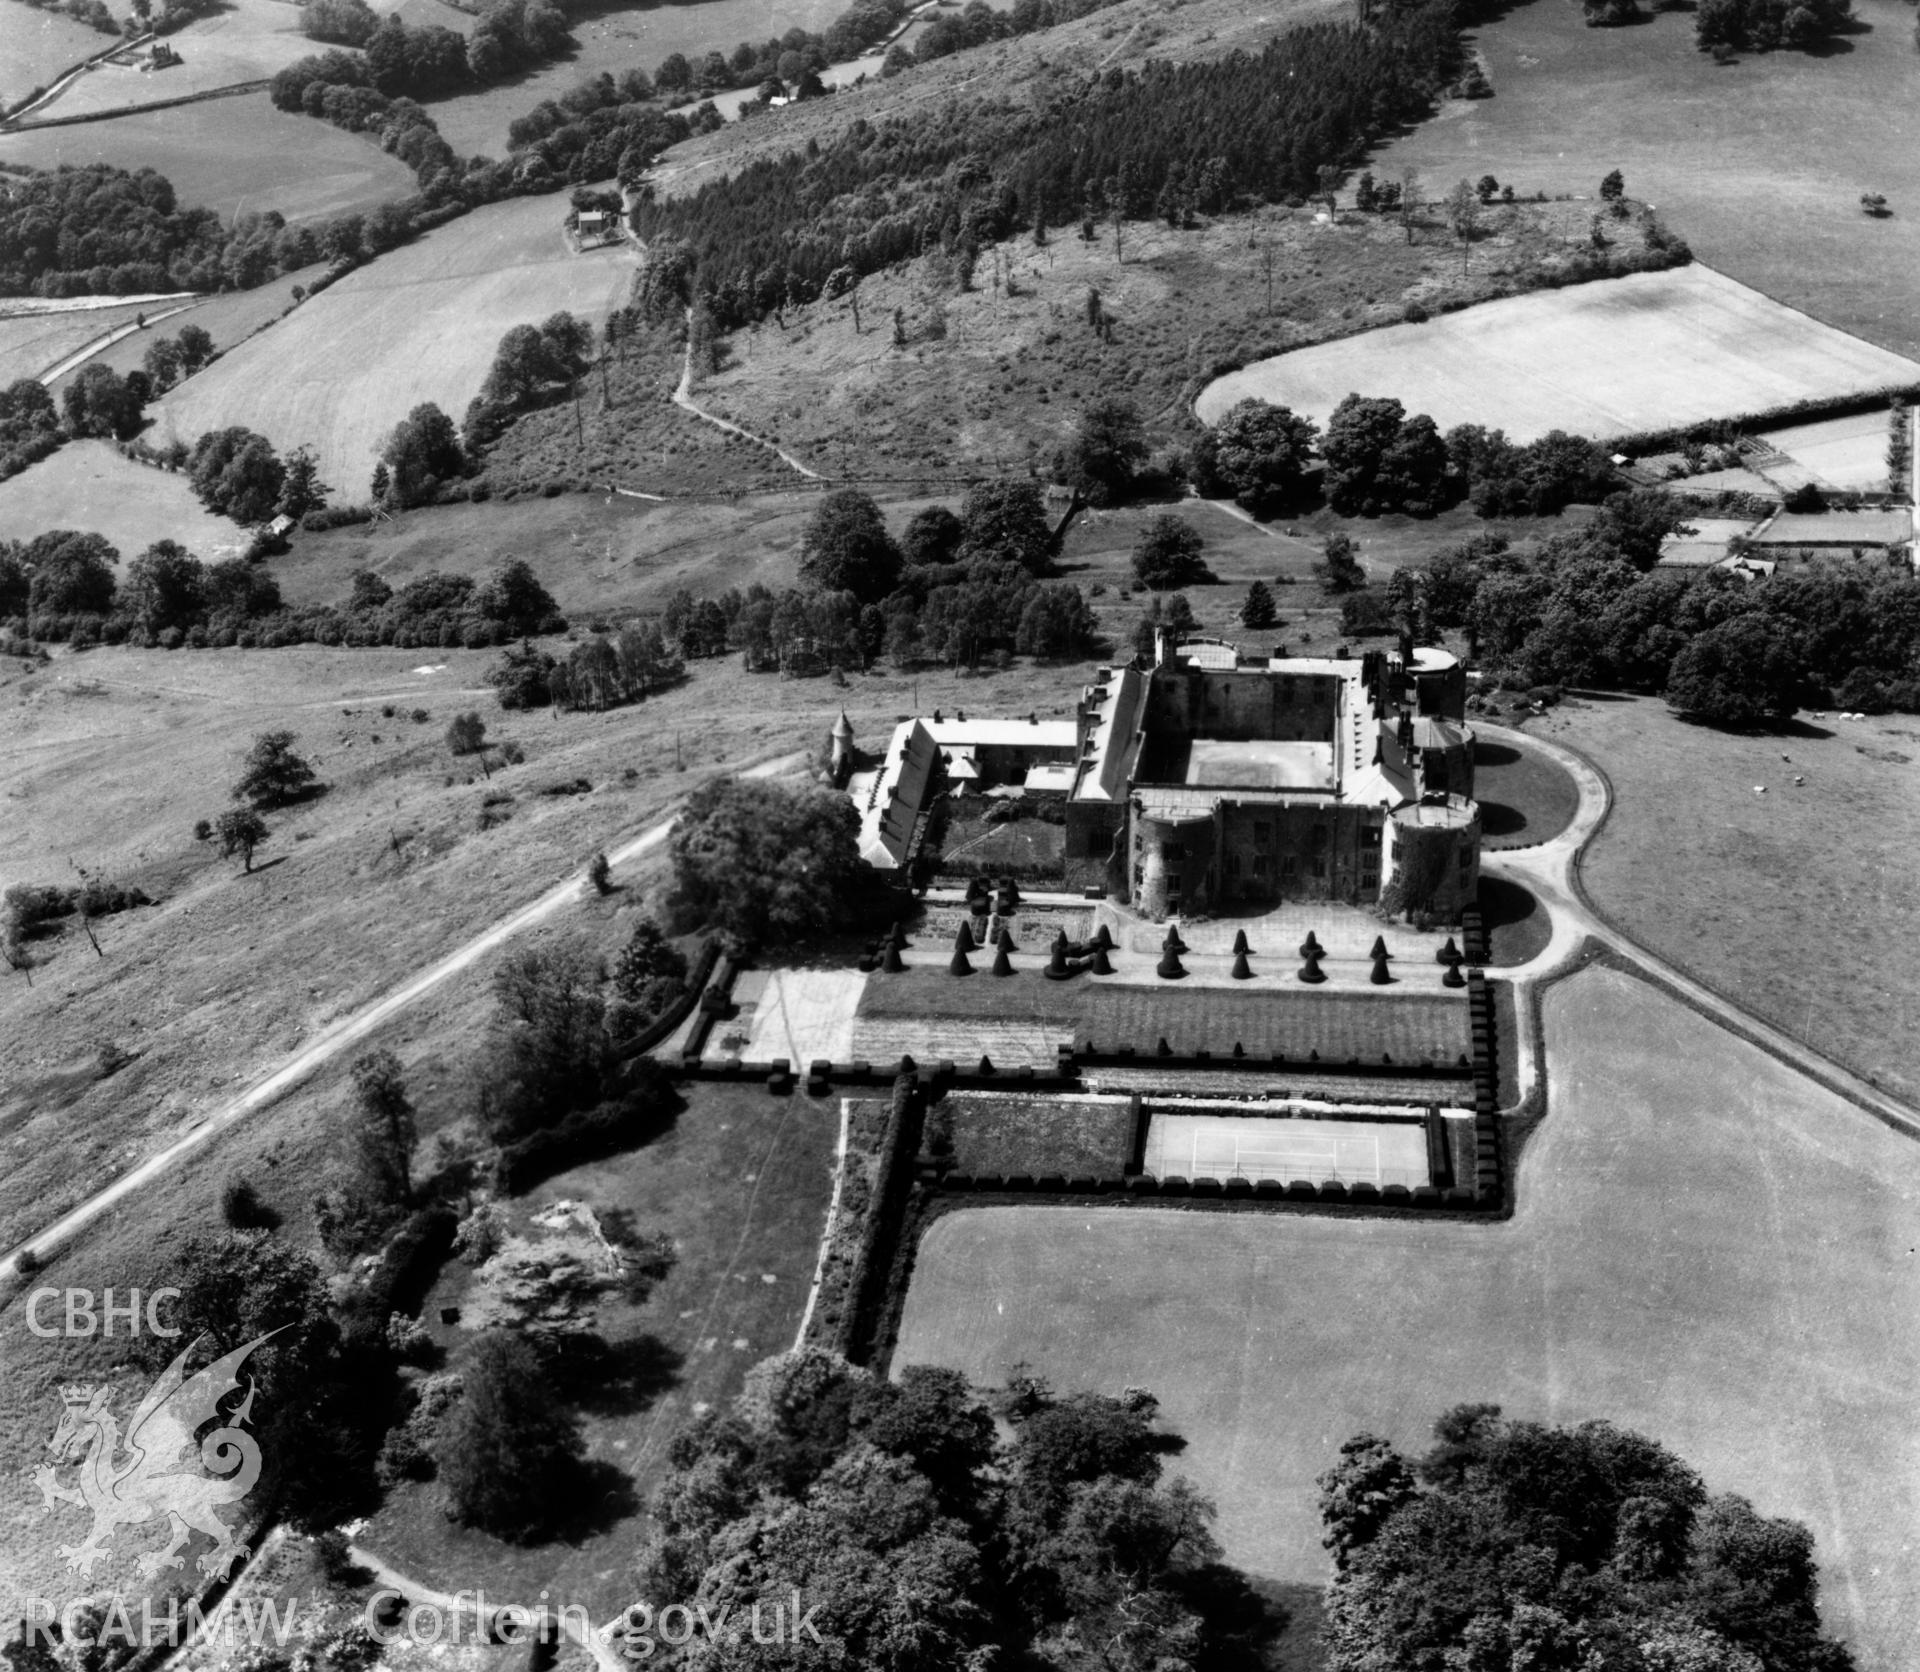 View of Chirk castle. Oblique aerial photograph, 5?" cut roll film.